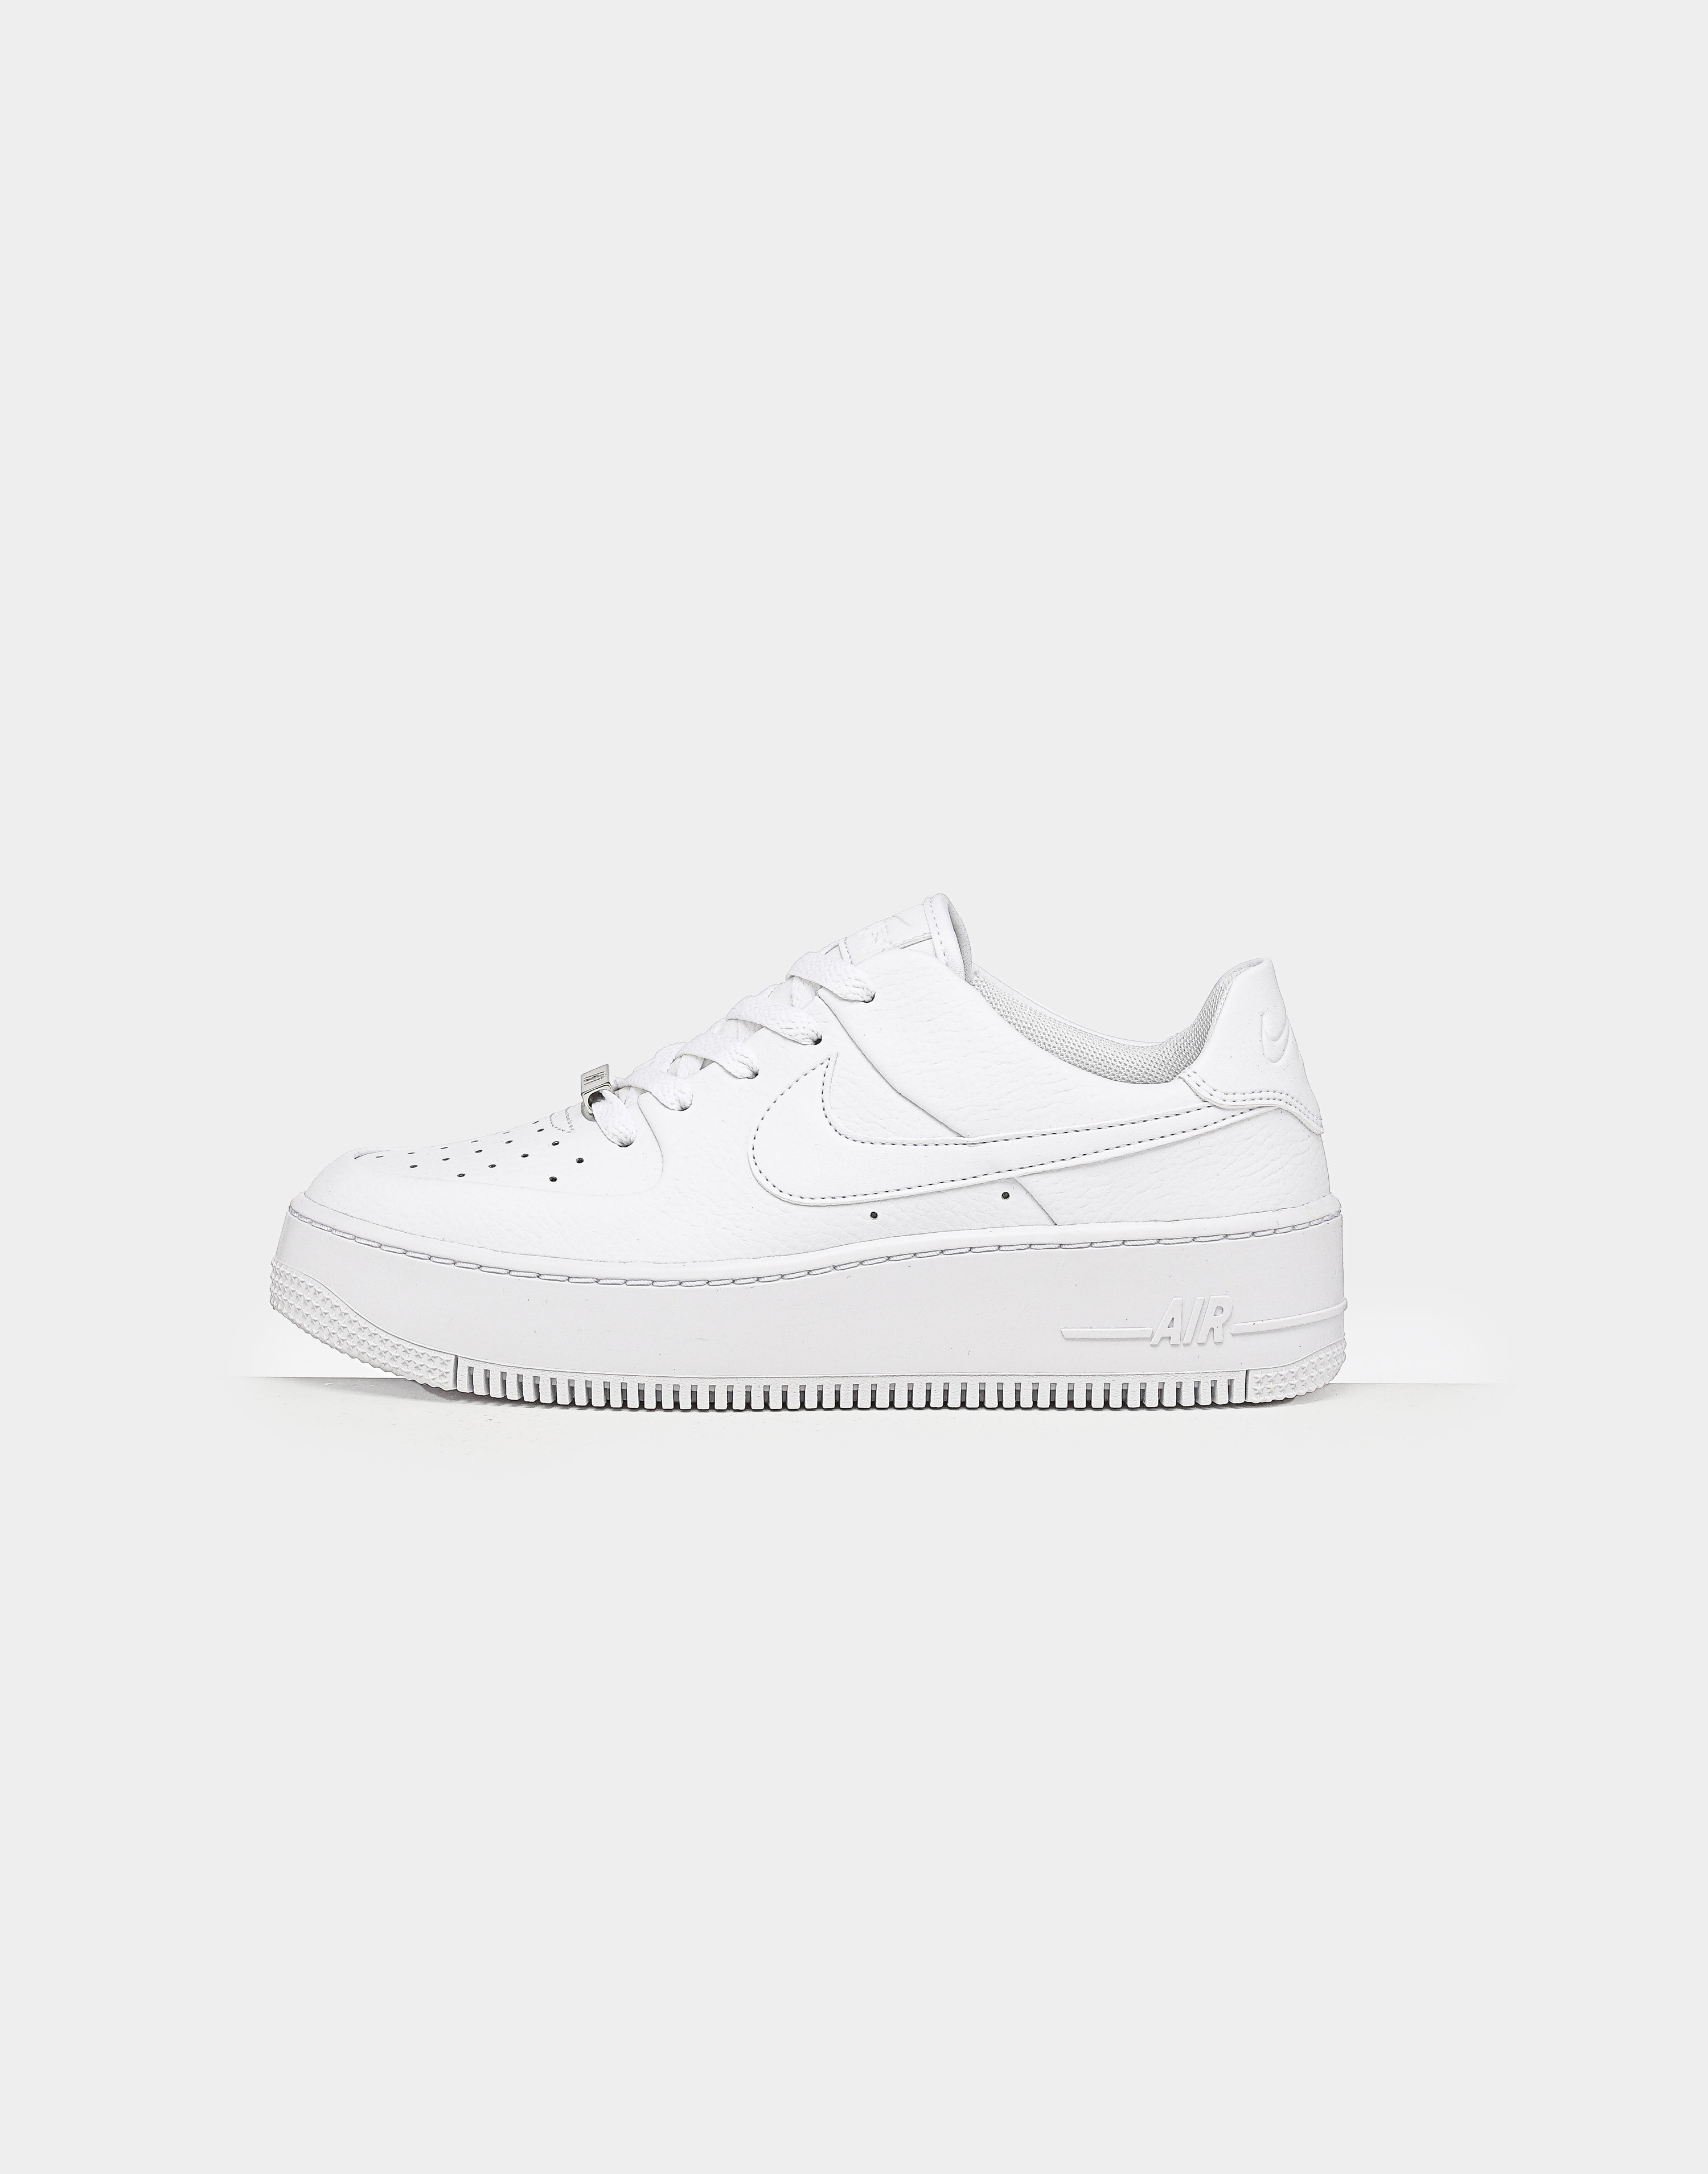 air force ones size 8 womens